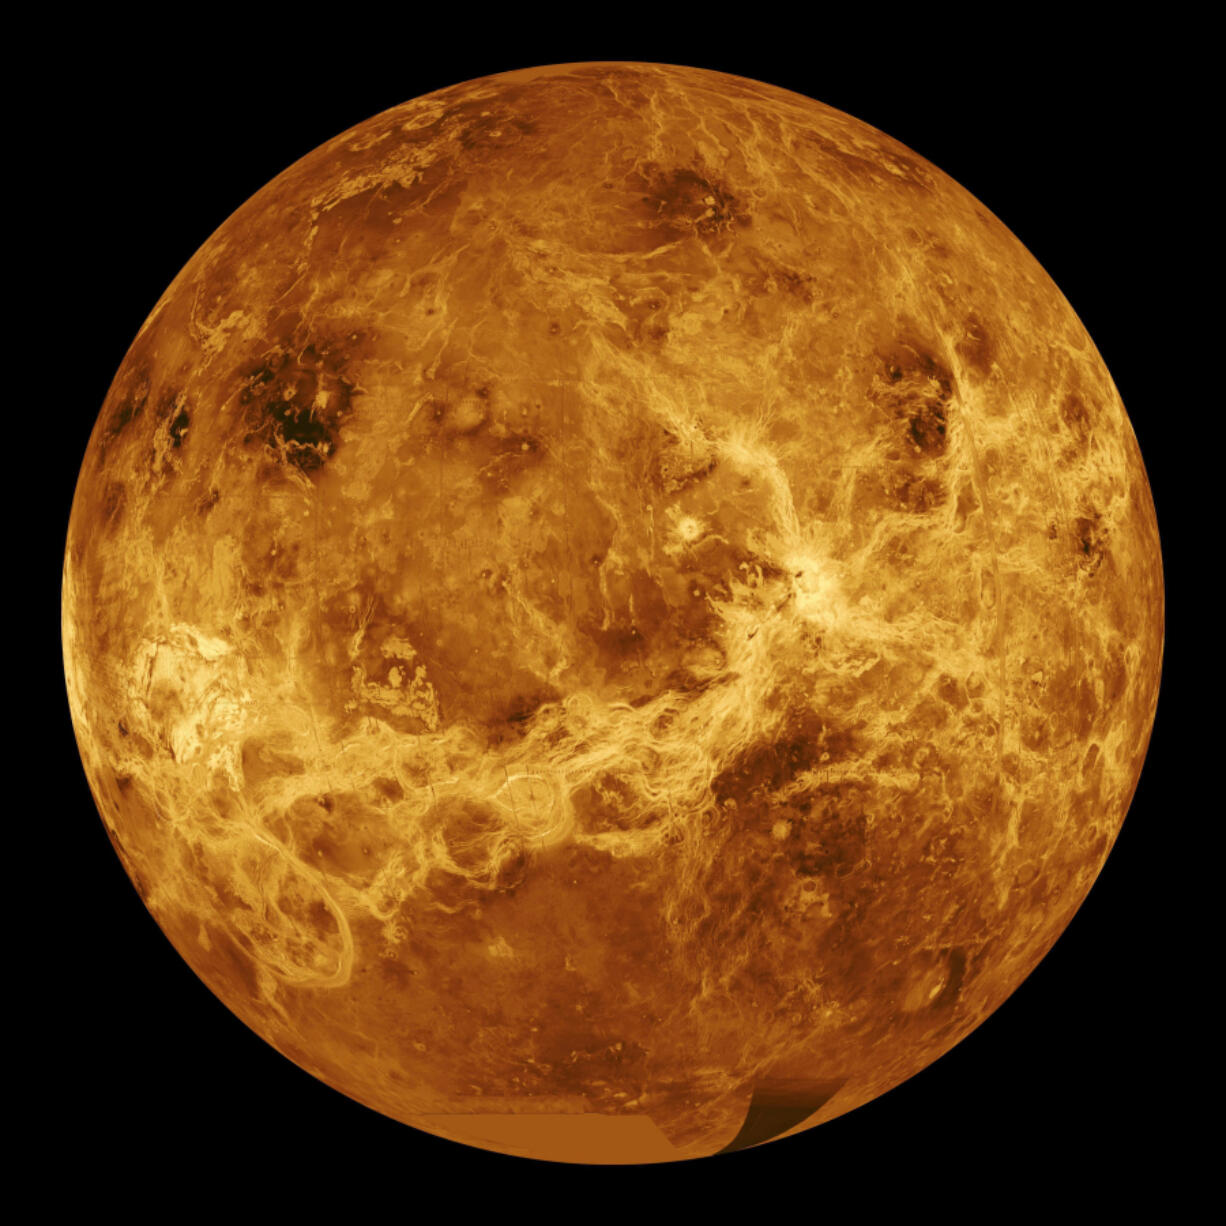 So sweet and pretty from a distance, so scary close up. This image of Venus was made with data produced by space probes in the early 1990s. Scientists are studying why our nearest planetary neighbor is so different from Earth - starting with its surface temperature of around 900 degrees Fahrenheit.